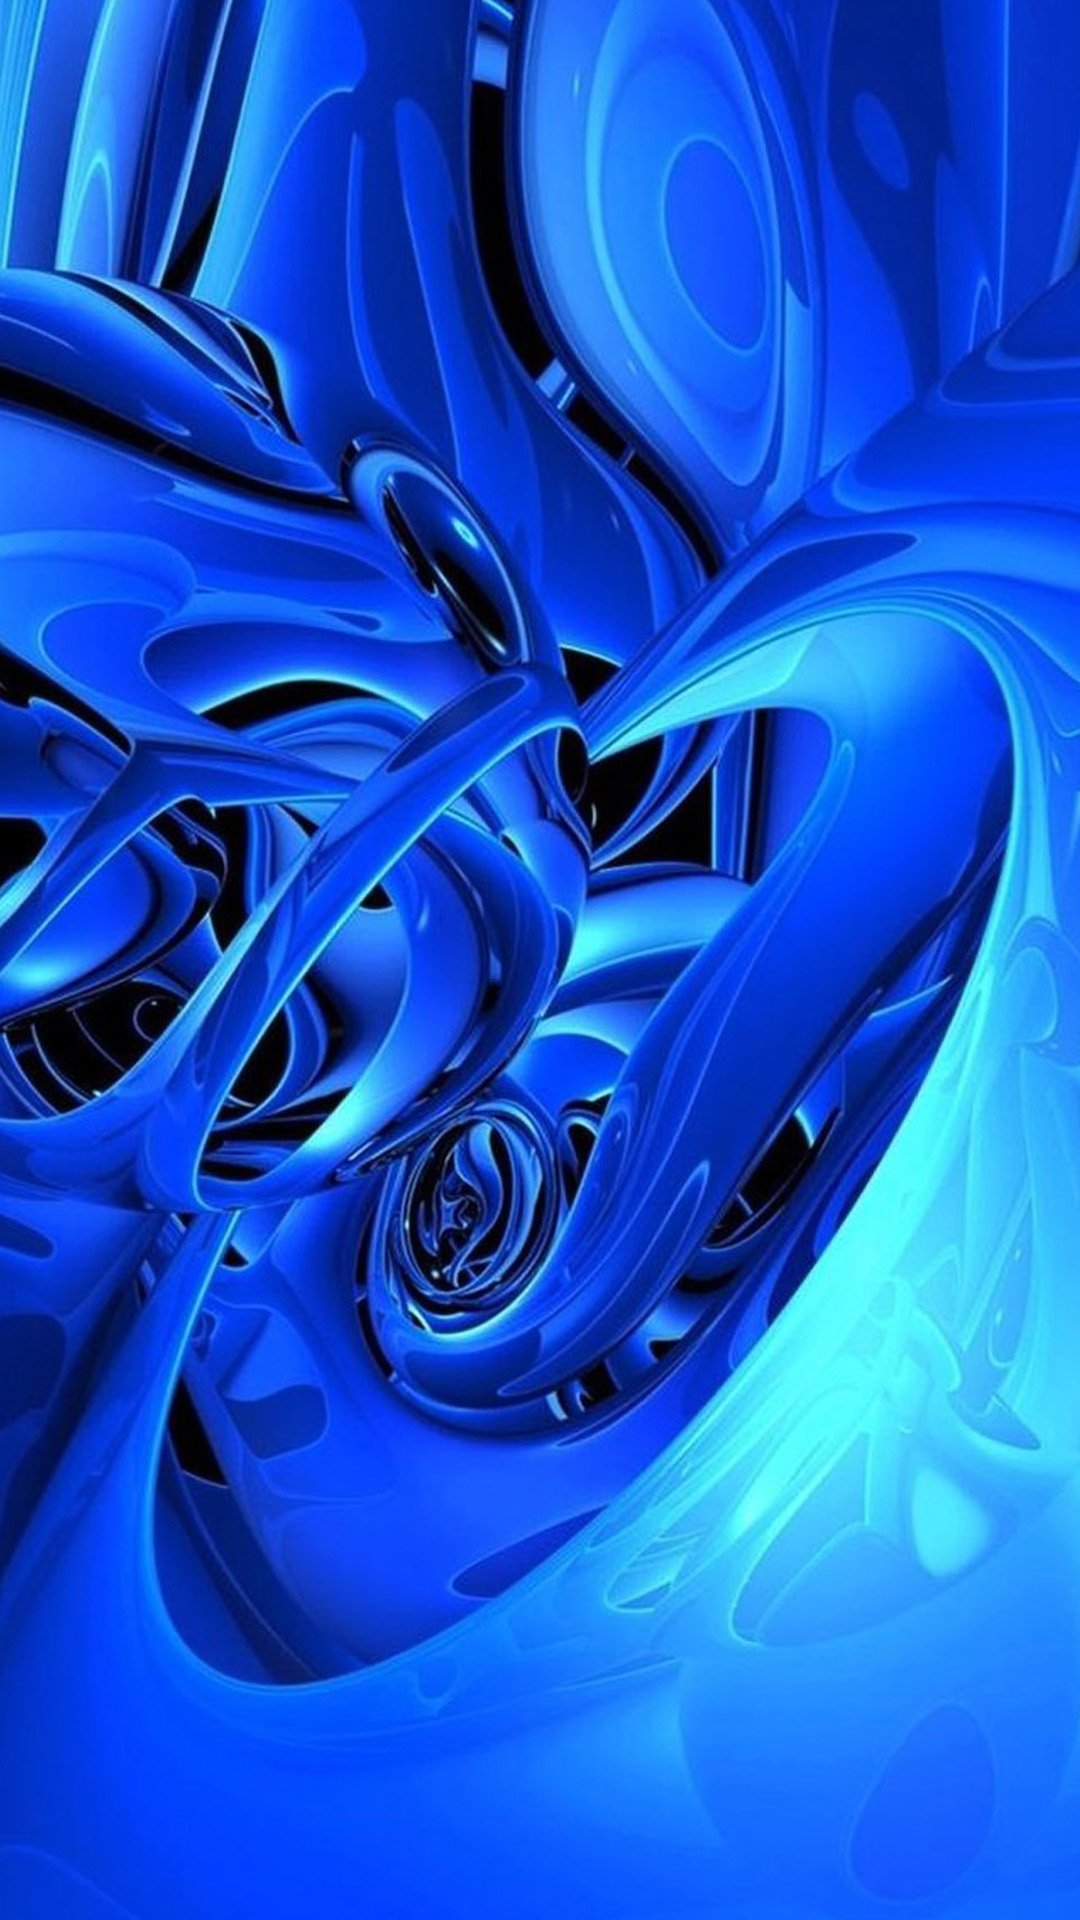 Blue 3d Abstract かっこいいブルーのスマホ壁紙 Iphone Wallpapers